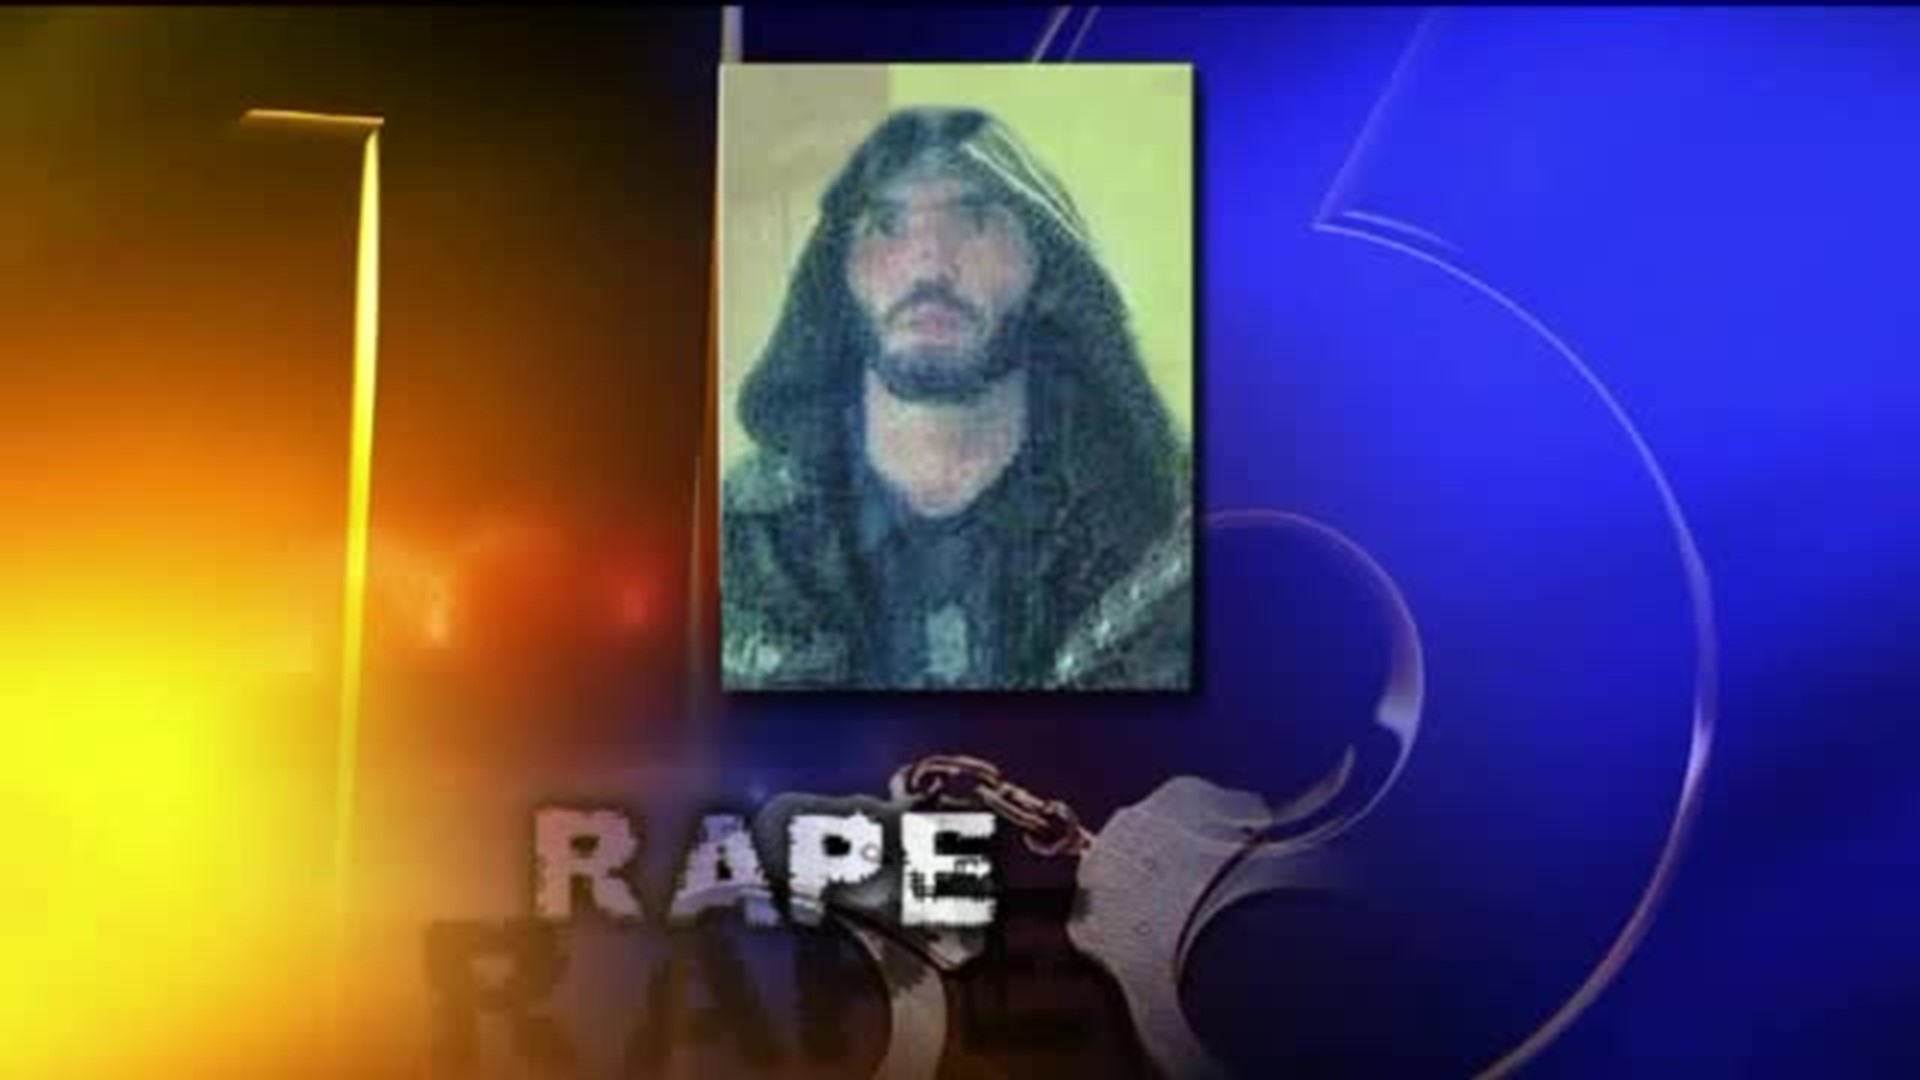 Police Looking for Alleged Rapist